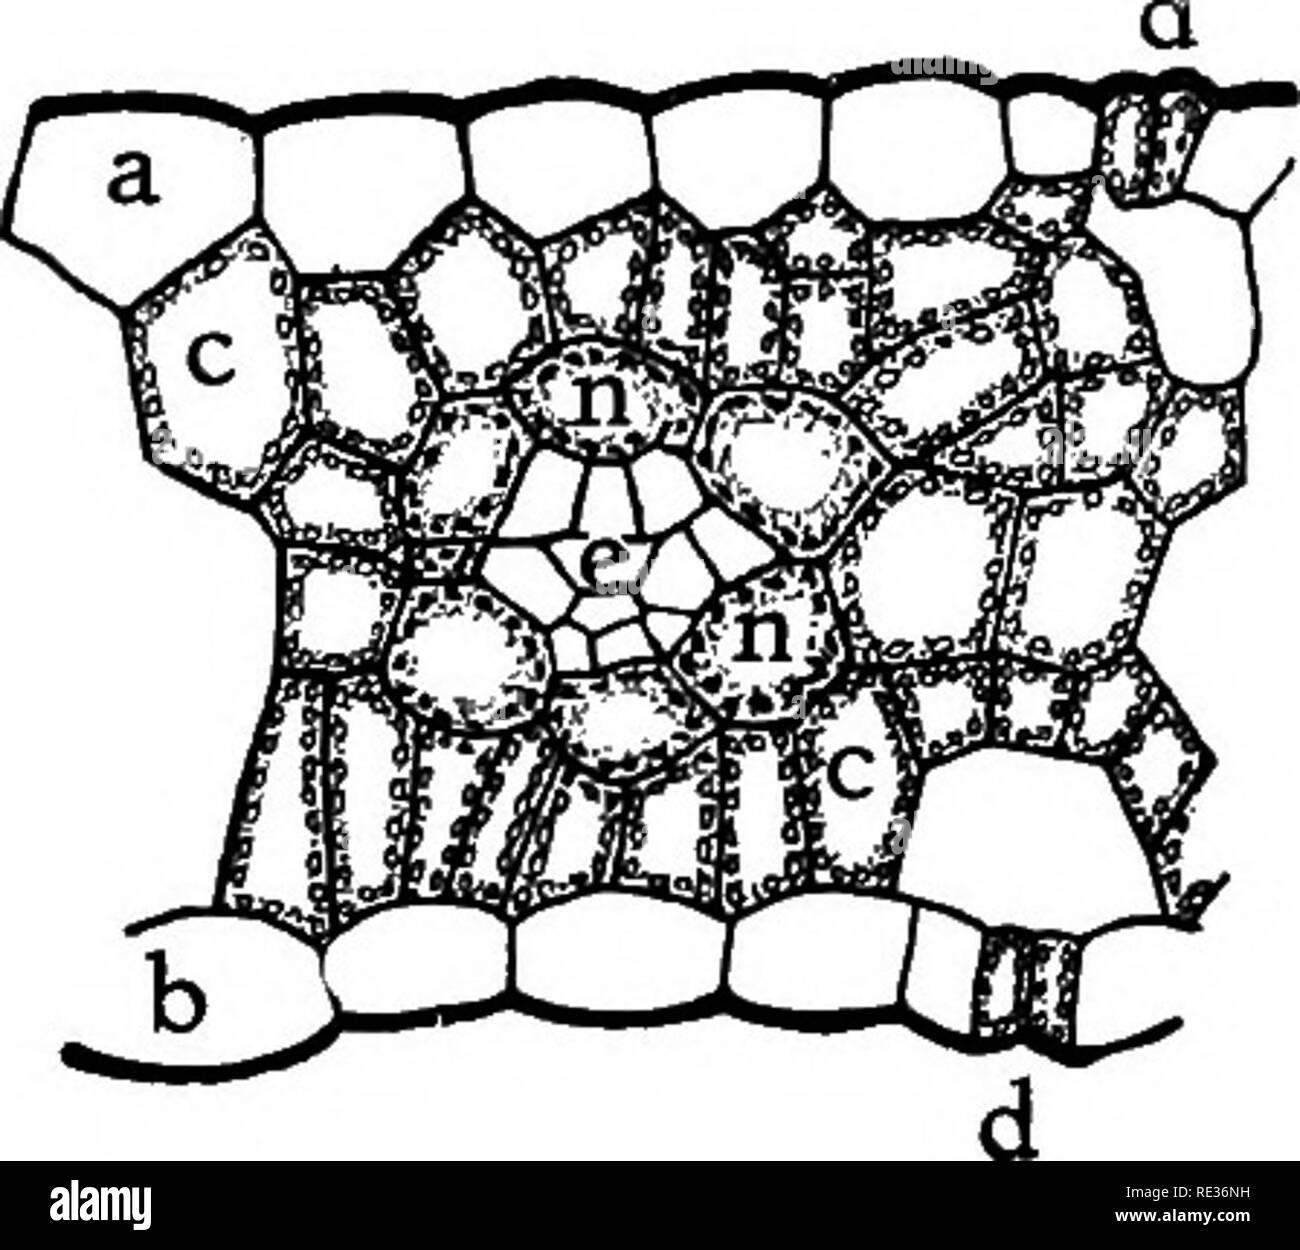 . Plant anatomy from the standpoint of the development and functions of the tissues, and handbook of micro-technic. Plant anatomy. 148 CONSTRUCTION OF PLANT'S FOOD. Pig. So.—Cross section of a portion of a leaf of Indian corn. a, upper, and b, lower epidermis; c, c, palisade cells; n, border parenchyma containing starch within its chloroplasts; e, vas- cular bundle; d. d, stomata. but the parenchyma sheath on bright days is well filled with it (Fig. 80). Of course the palisade cells manufacture soluble carbohydrate abundantly, and the starch in the sheath cells doubtless represents a surplus t Stock Photo